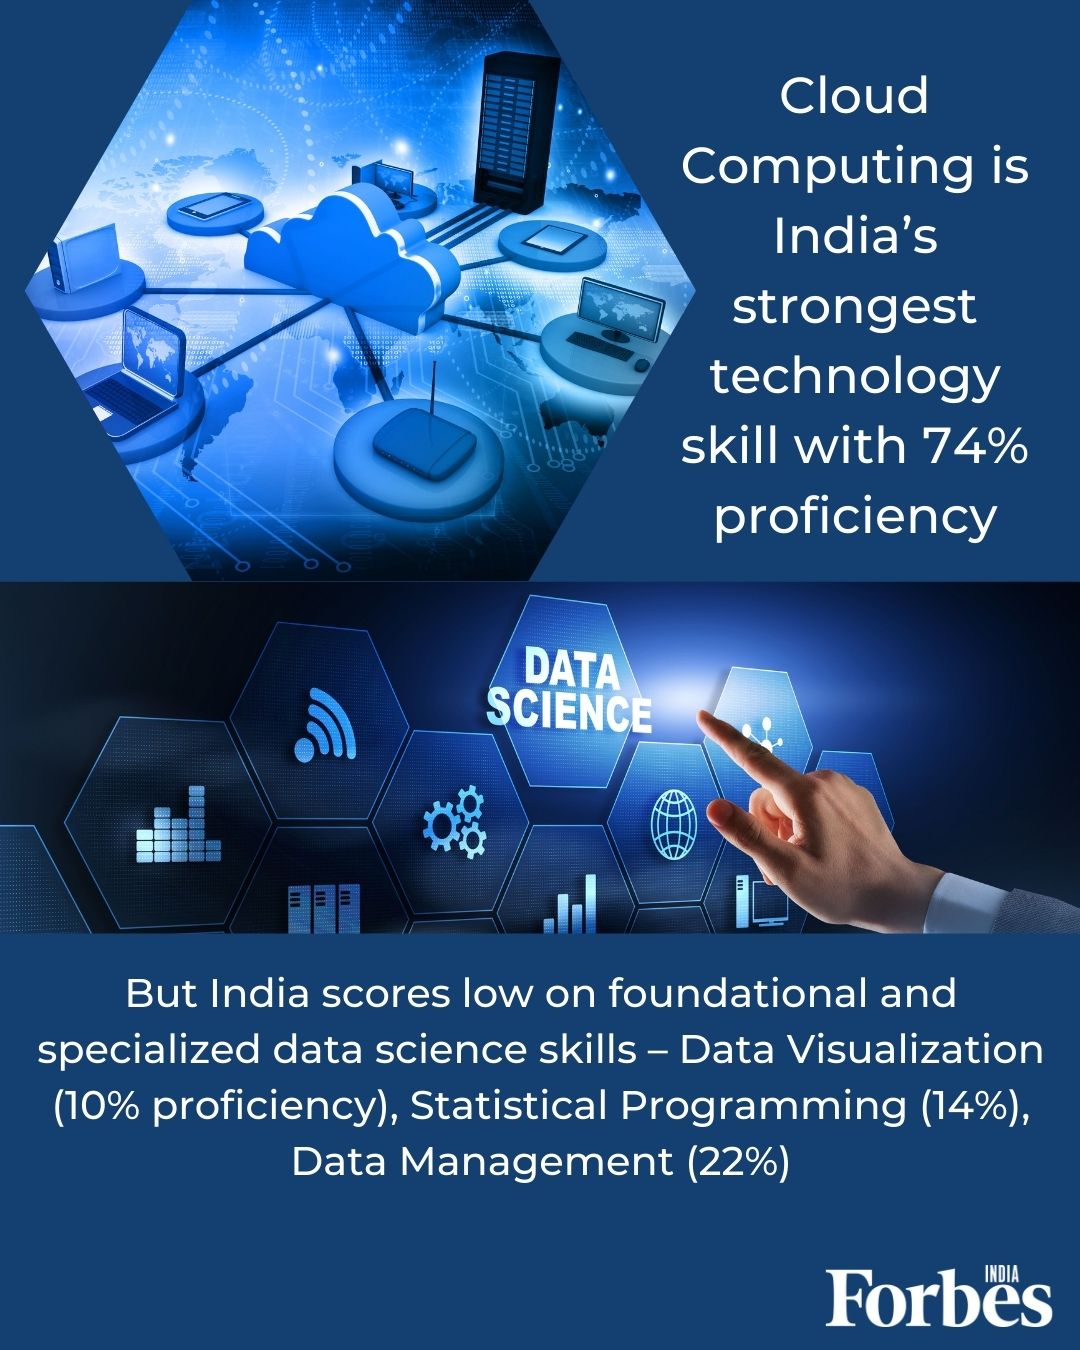 Cloud computing is India's strongest tech skill, data skills need more attention